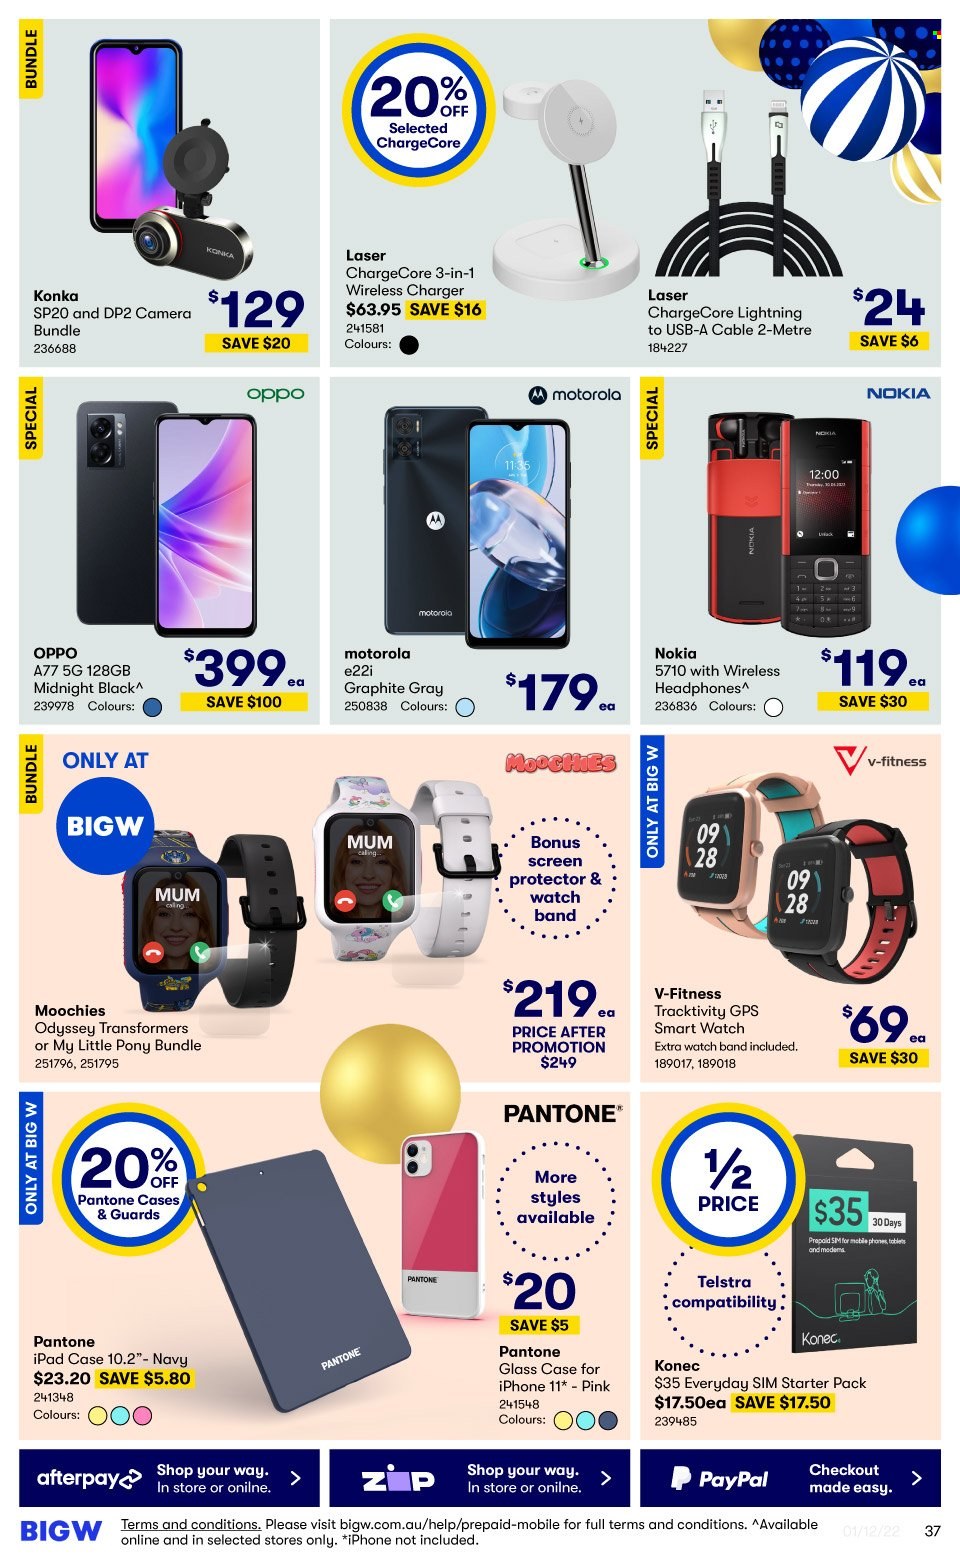 thumbnail - BIG W Catalogue - Sales products - iPad, Mum, Motorola, Nokia, Oppo, iPhone, iPhone 11, wireless charger, smart watch, camera, headphones, wireless headphones, My Little Pony. Page 37.